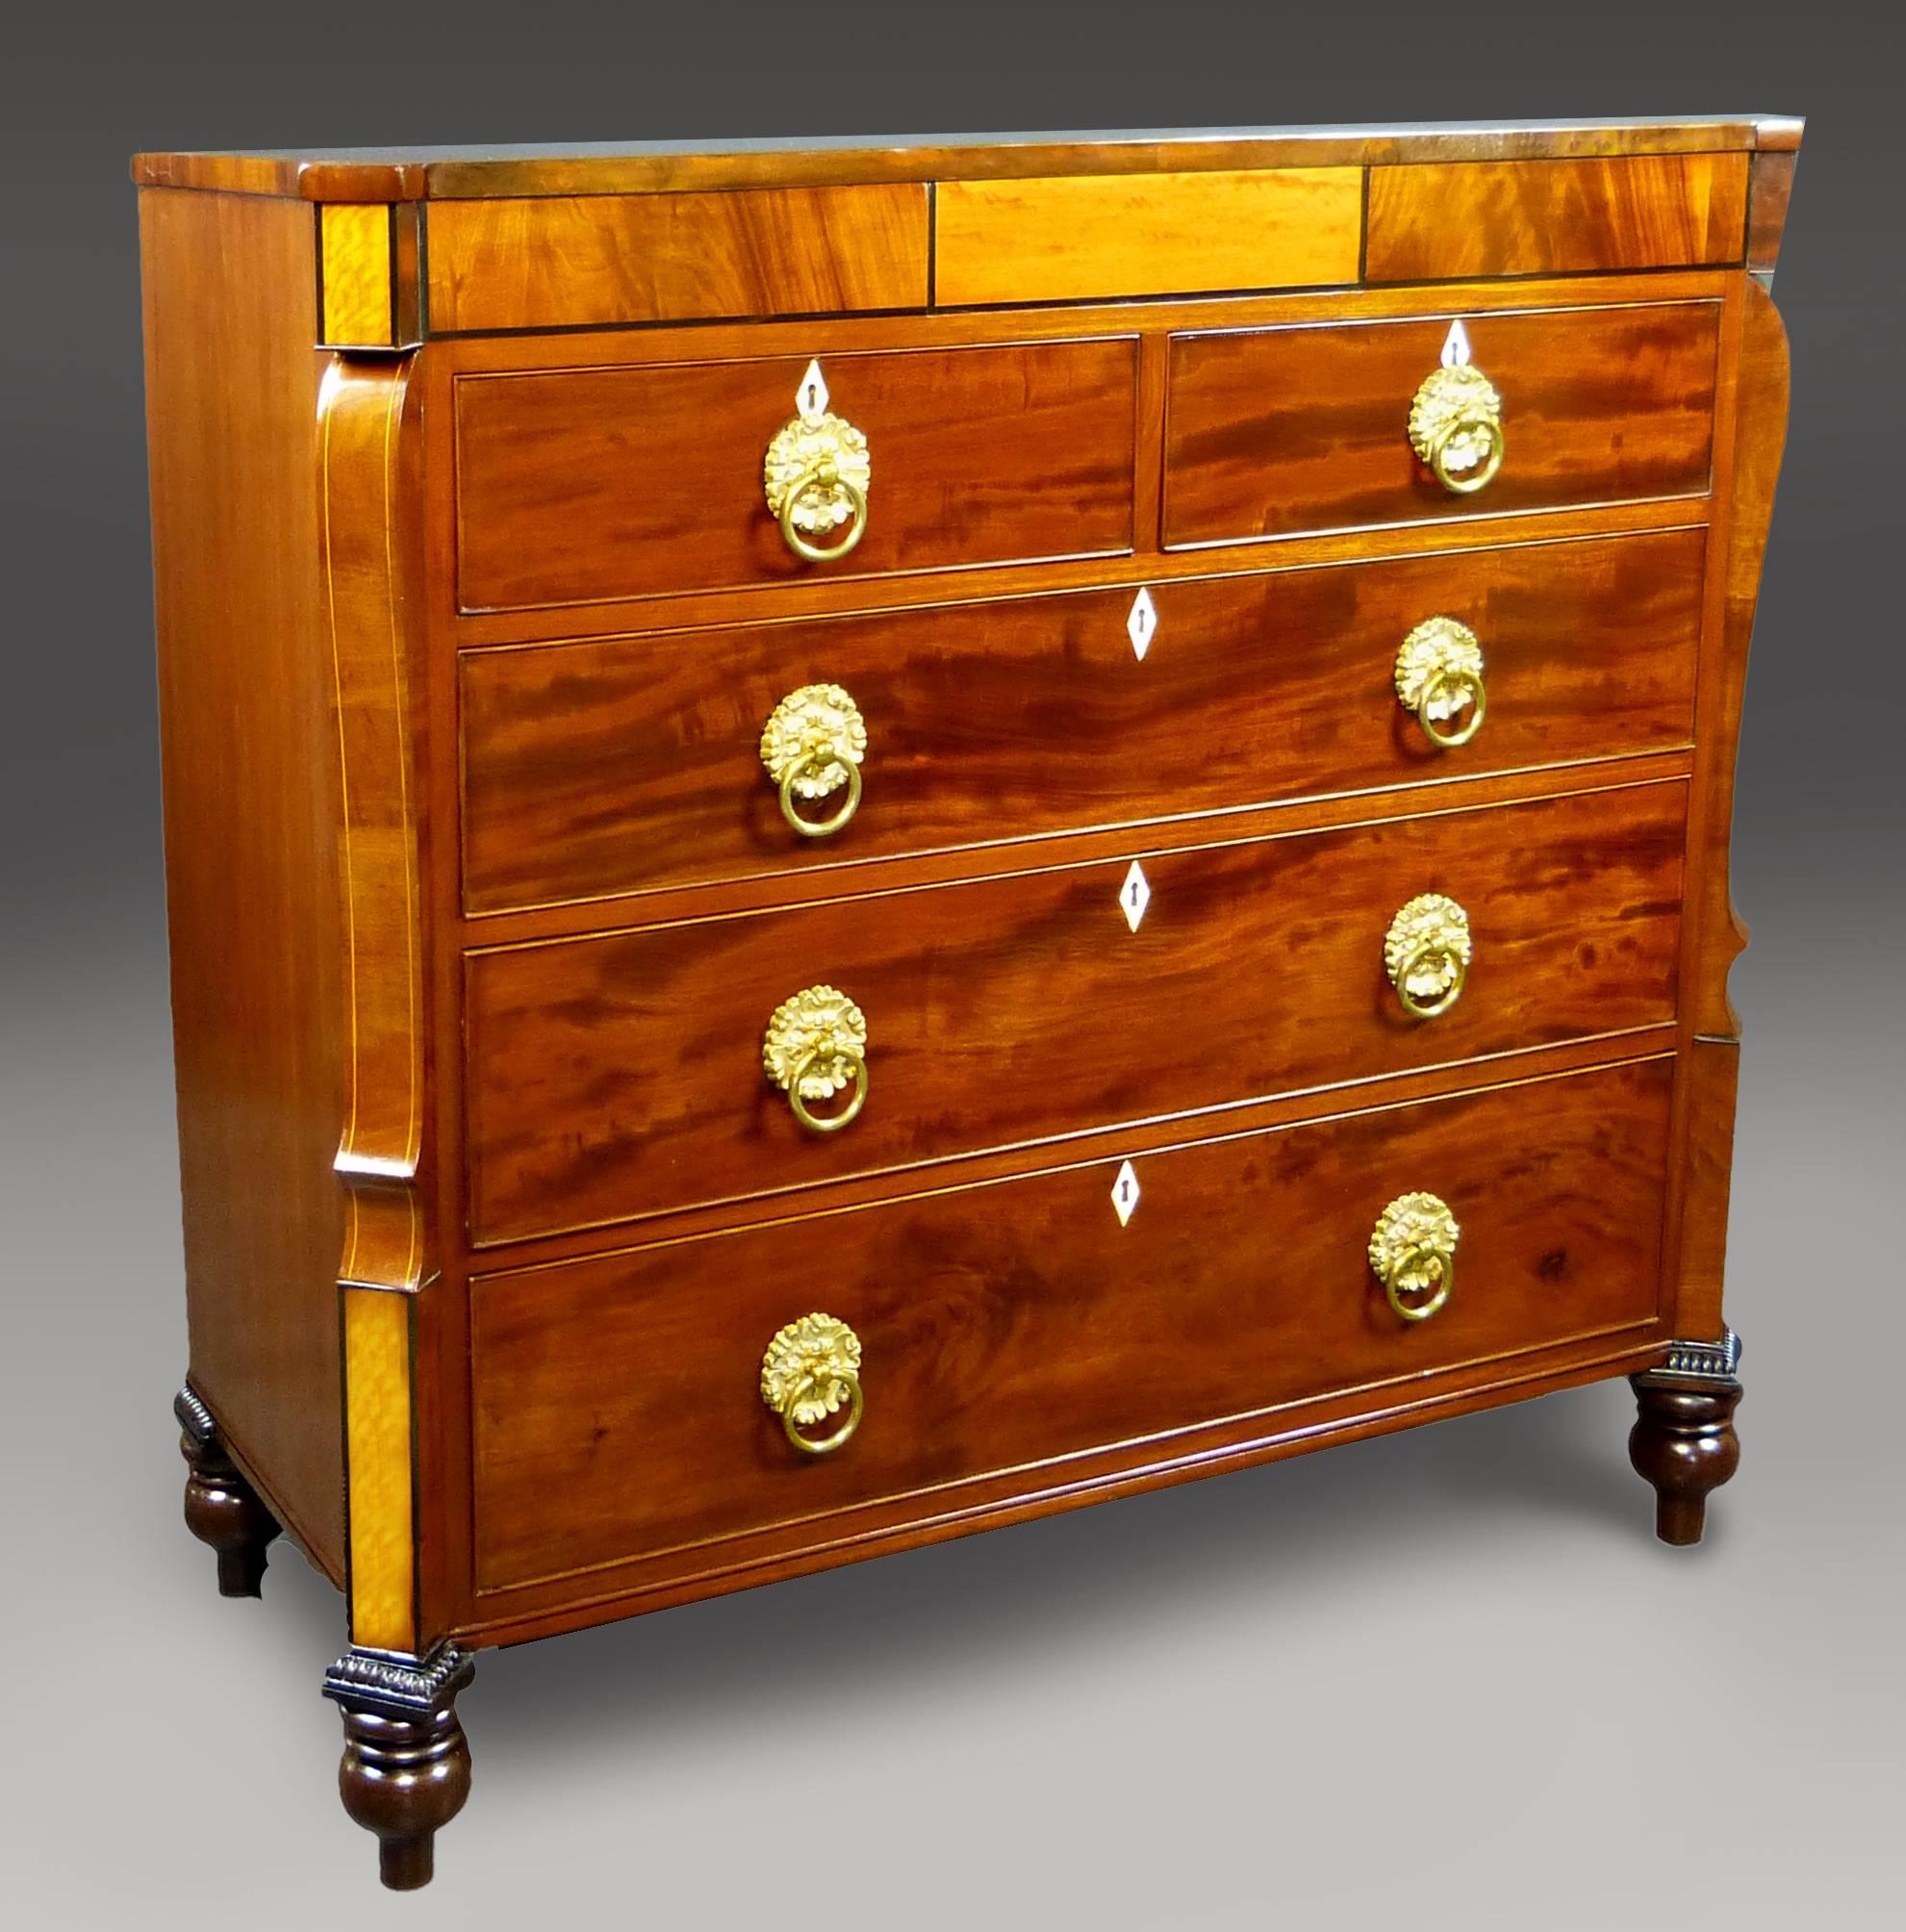 Fine and unusual mahogany chest of drawers dating to the William IV period of England (1830-1838) with rare angled and moulded pillars decorated with satinwood panels with ebony trim and moulded line inlaid walnut. The straight front features a